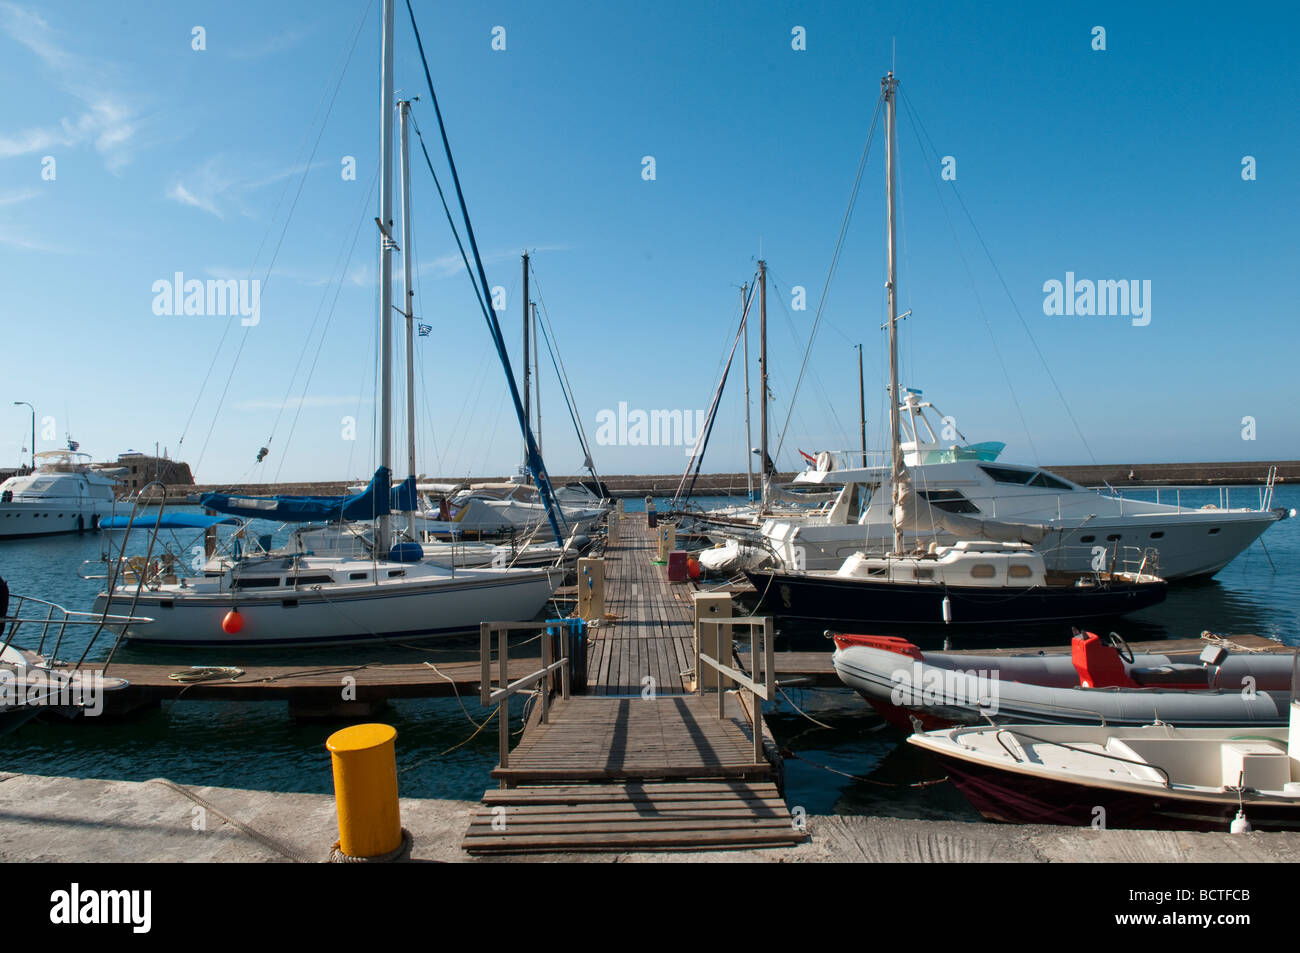 Yachts moored on the jetty at the Venetian harbour in Chania, Crete, Greece. Stock Photo